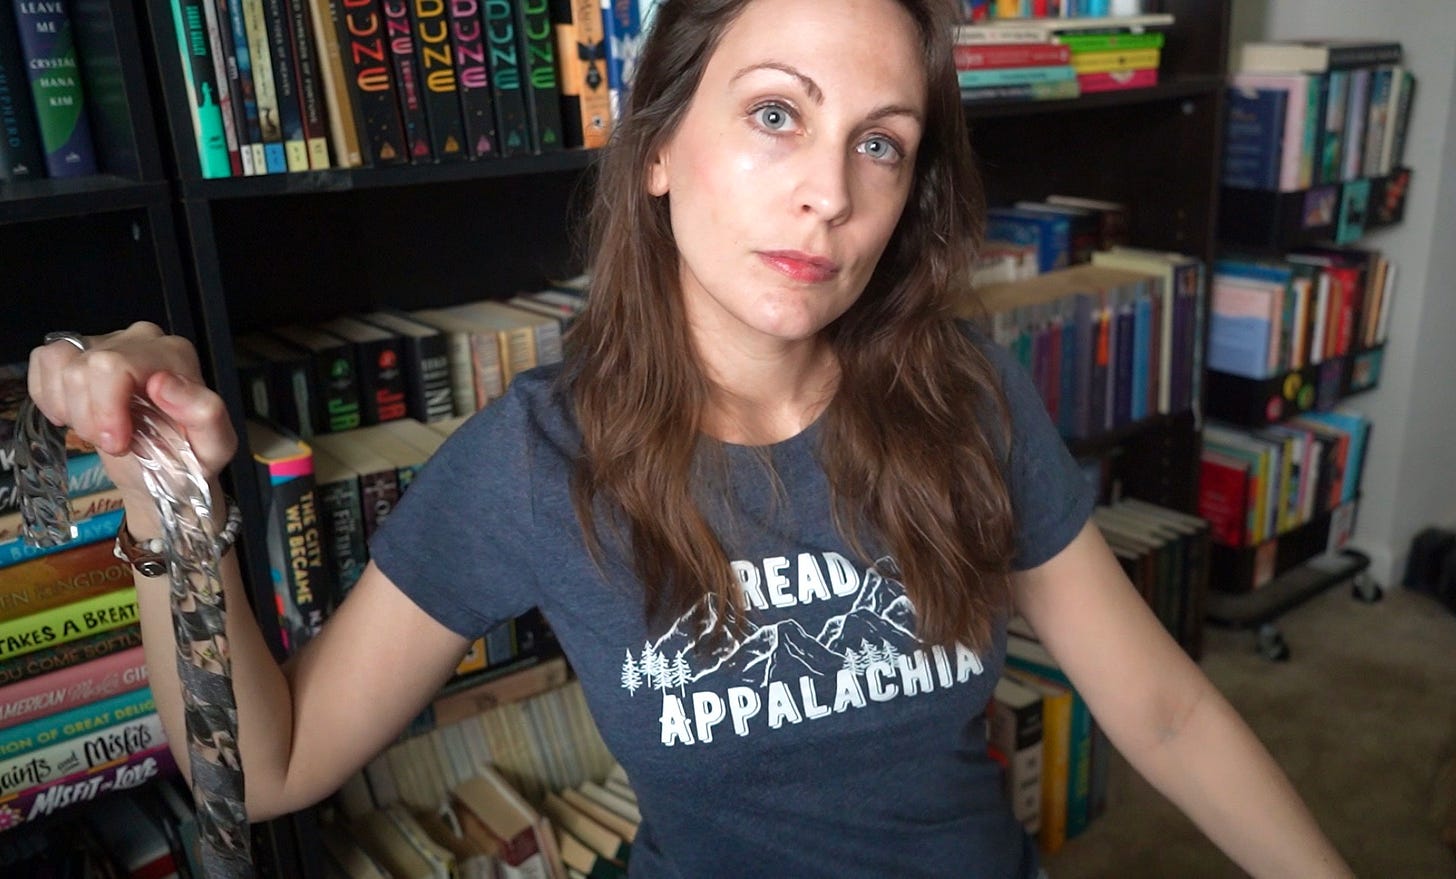 a photo of Kendra, a white woman with brunette hair, wearing a Read Appalachia t-shirt and holding a cane in here right hand